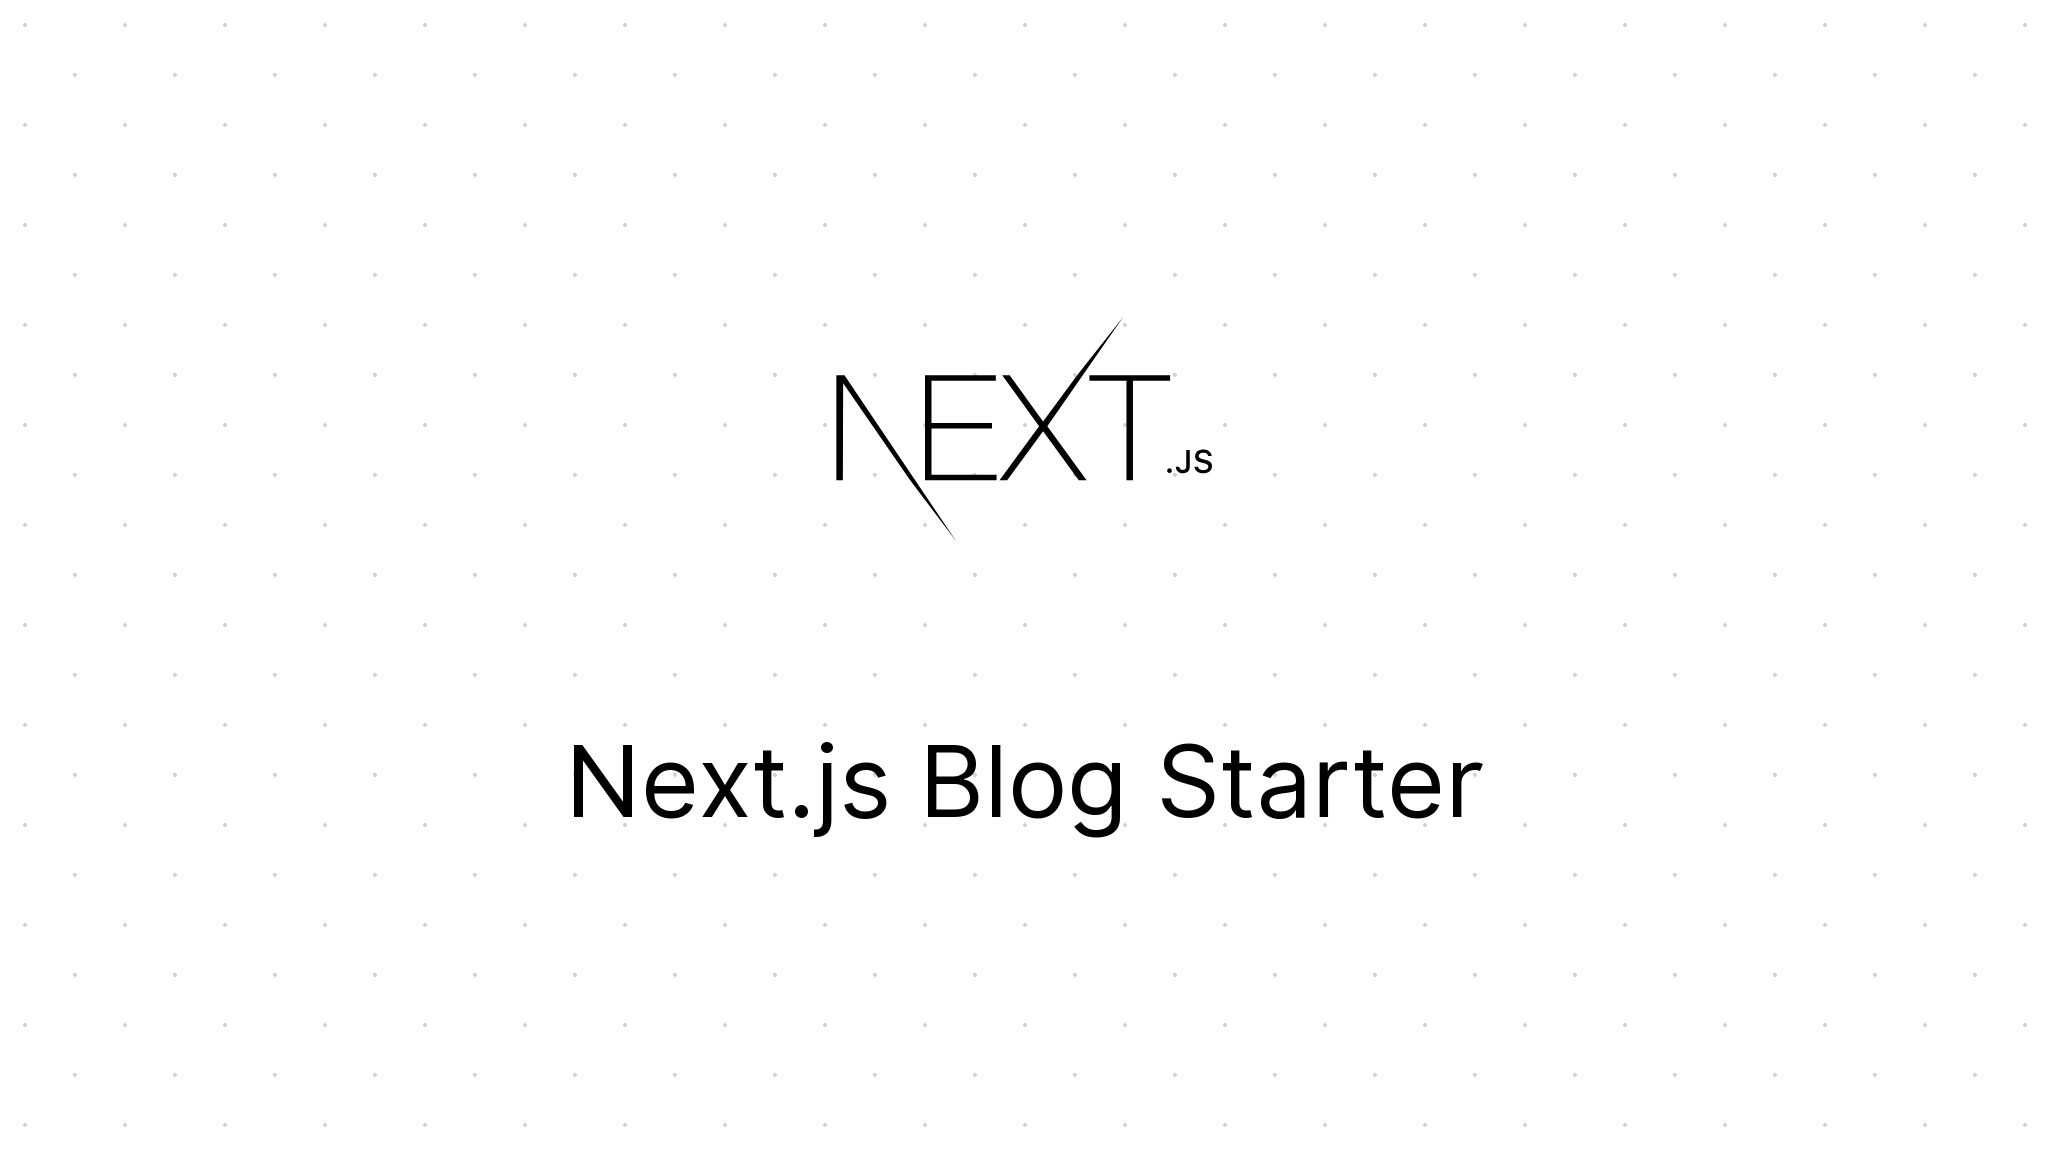 Cover Image for ブログを Next.js v12 に移行しました